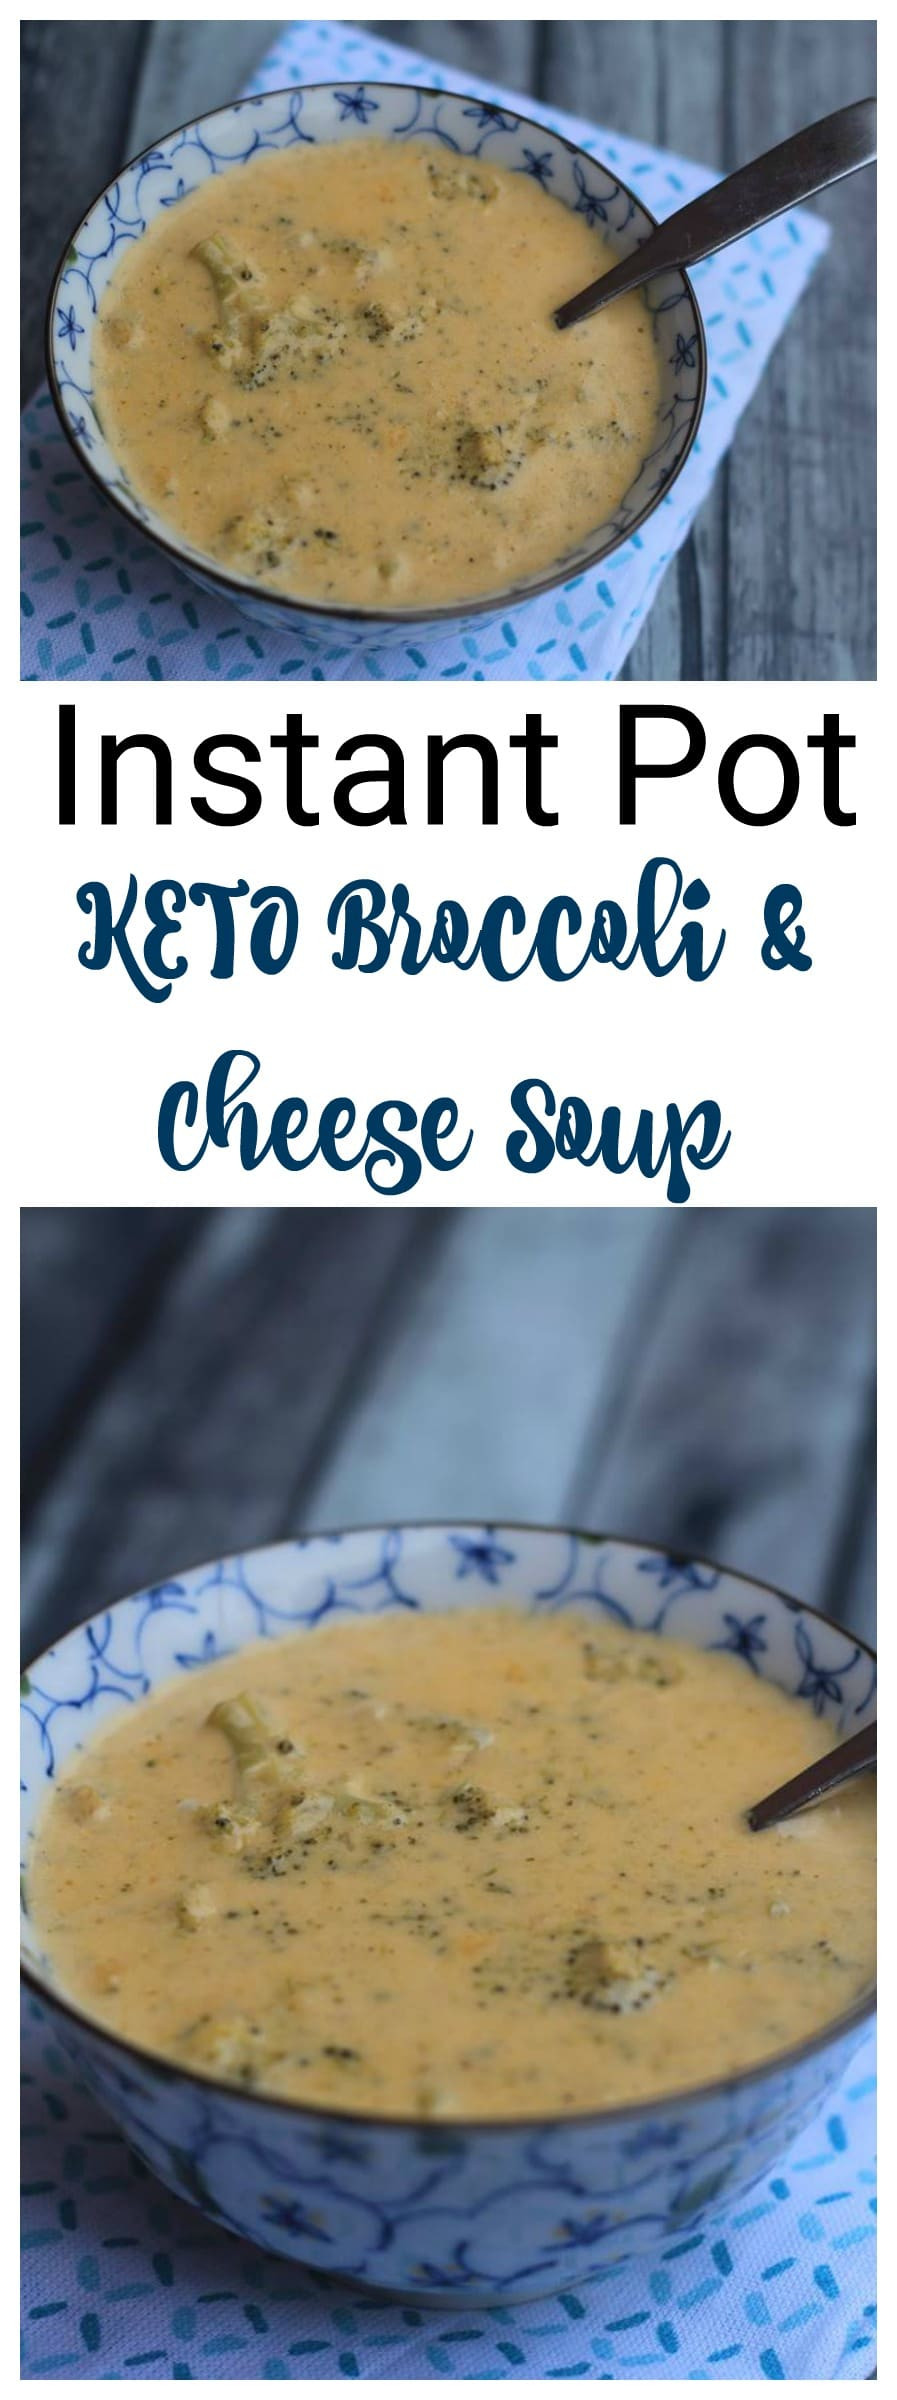 Instant Pot Keto Broccoli Cheese Soup
 Instant Pot Broccoli & Cheese Soup Recipe Keto Low Carb